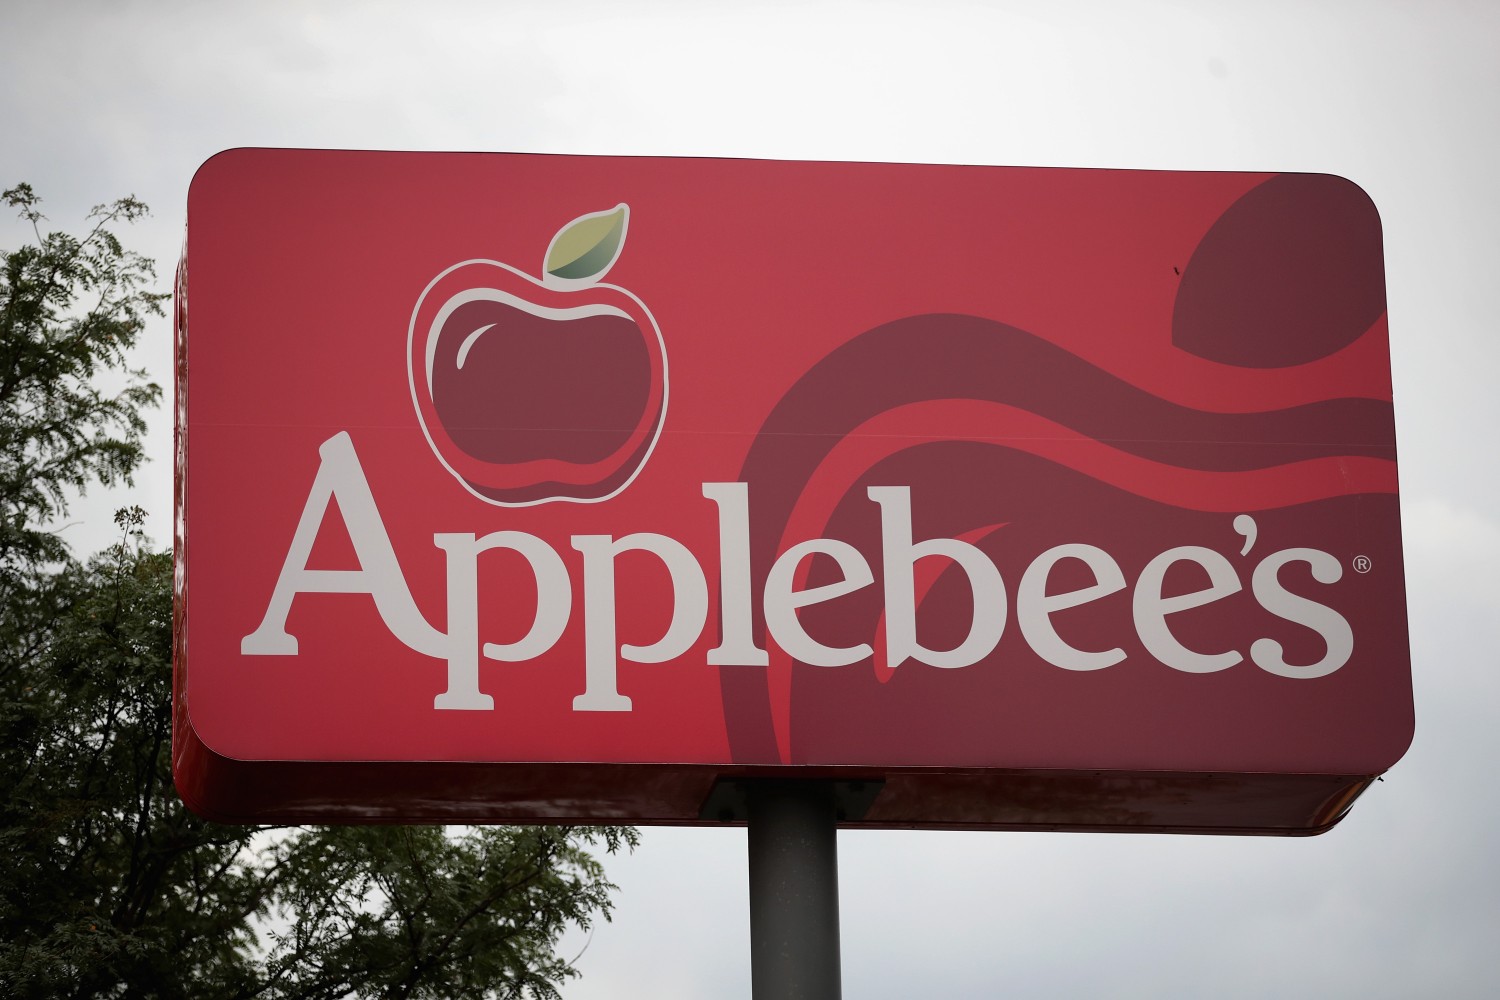 Restaurant Chains Applebee S And Ihop To Close Over 100